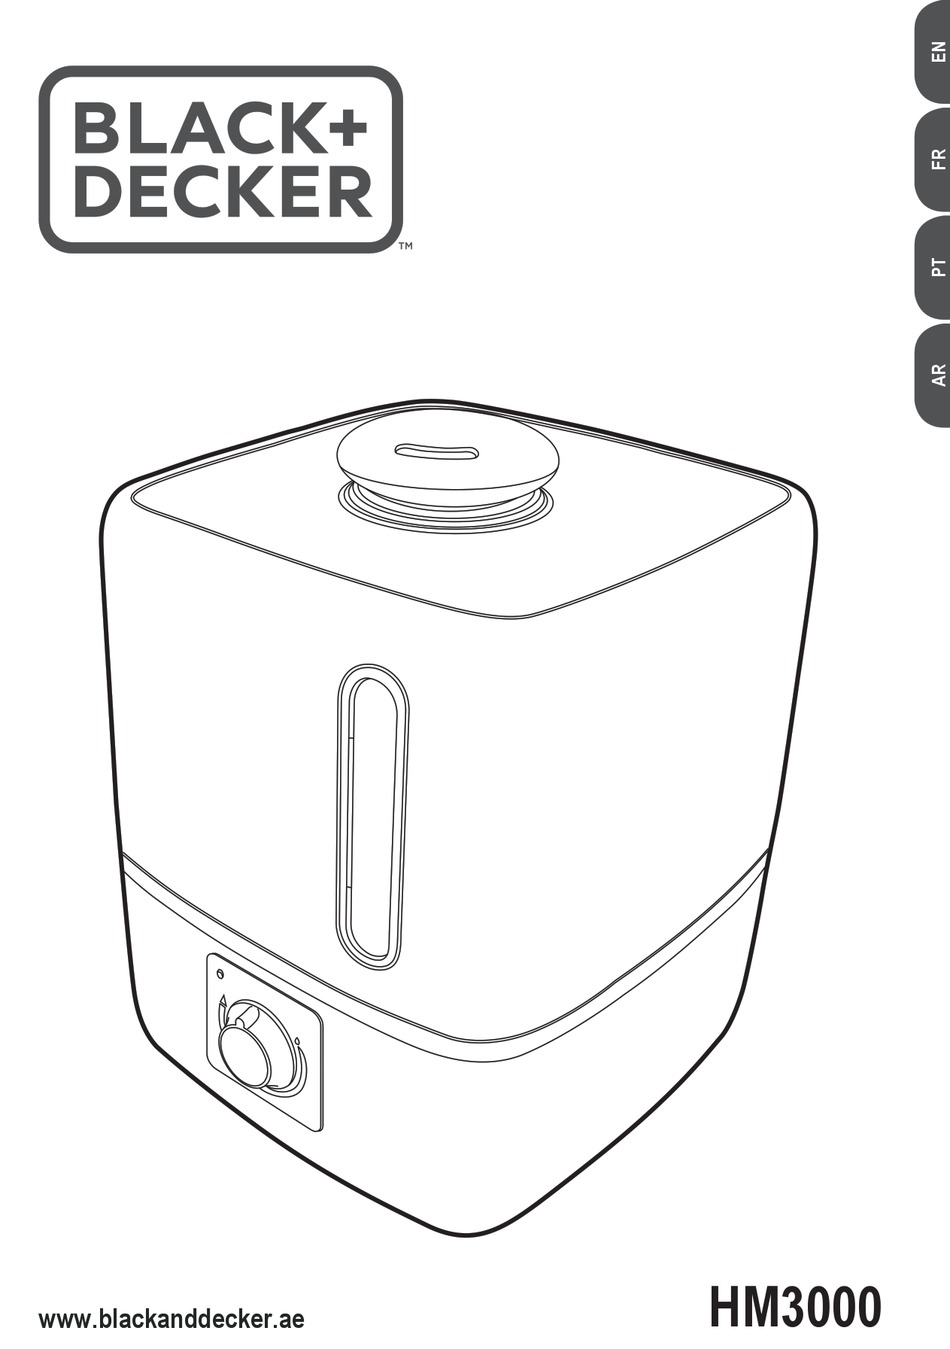 User manual Black & Decker HM5000 (English - 20 pages)